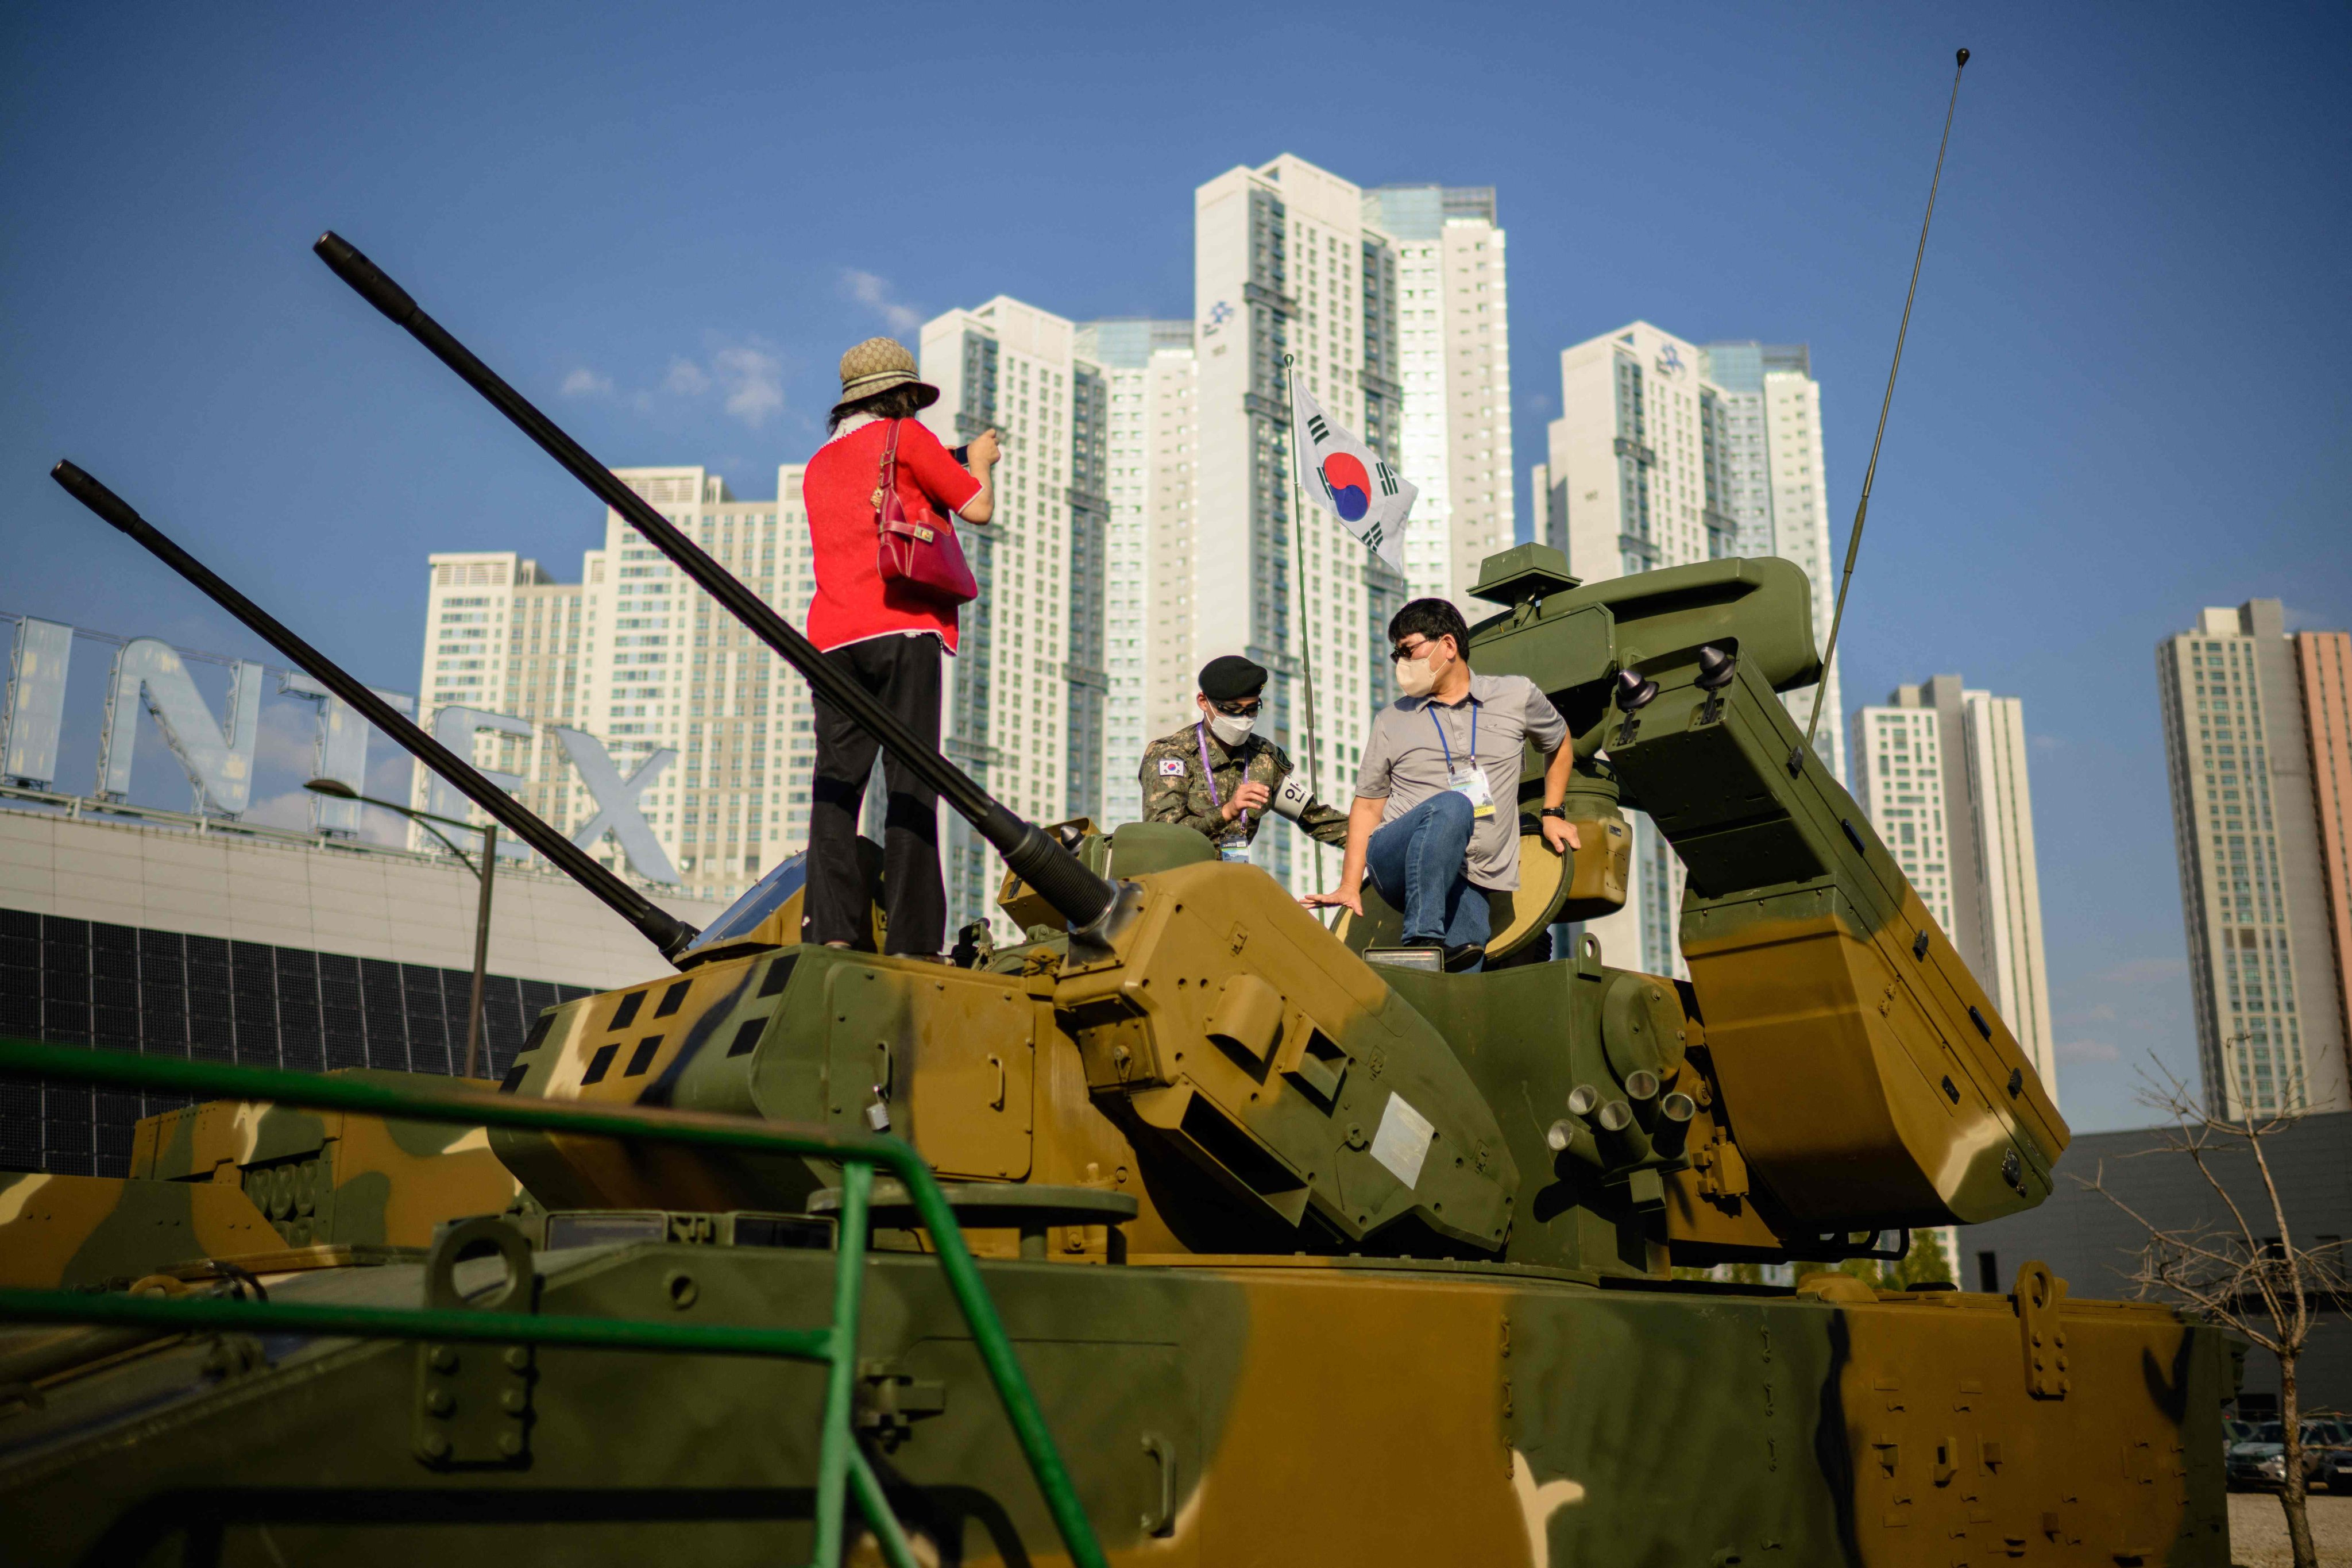 Visitors take turns getting a hands-on look at a 30mm self-propelled anti-aircraft system during last month’s defence expo in Goyang, South Korea. Photo: AFP